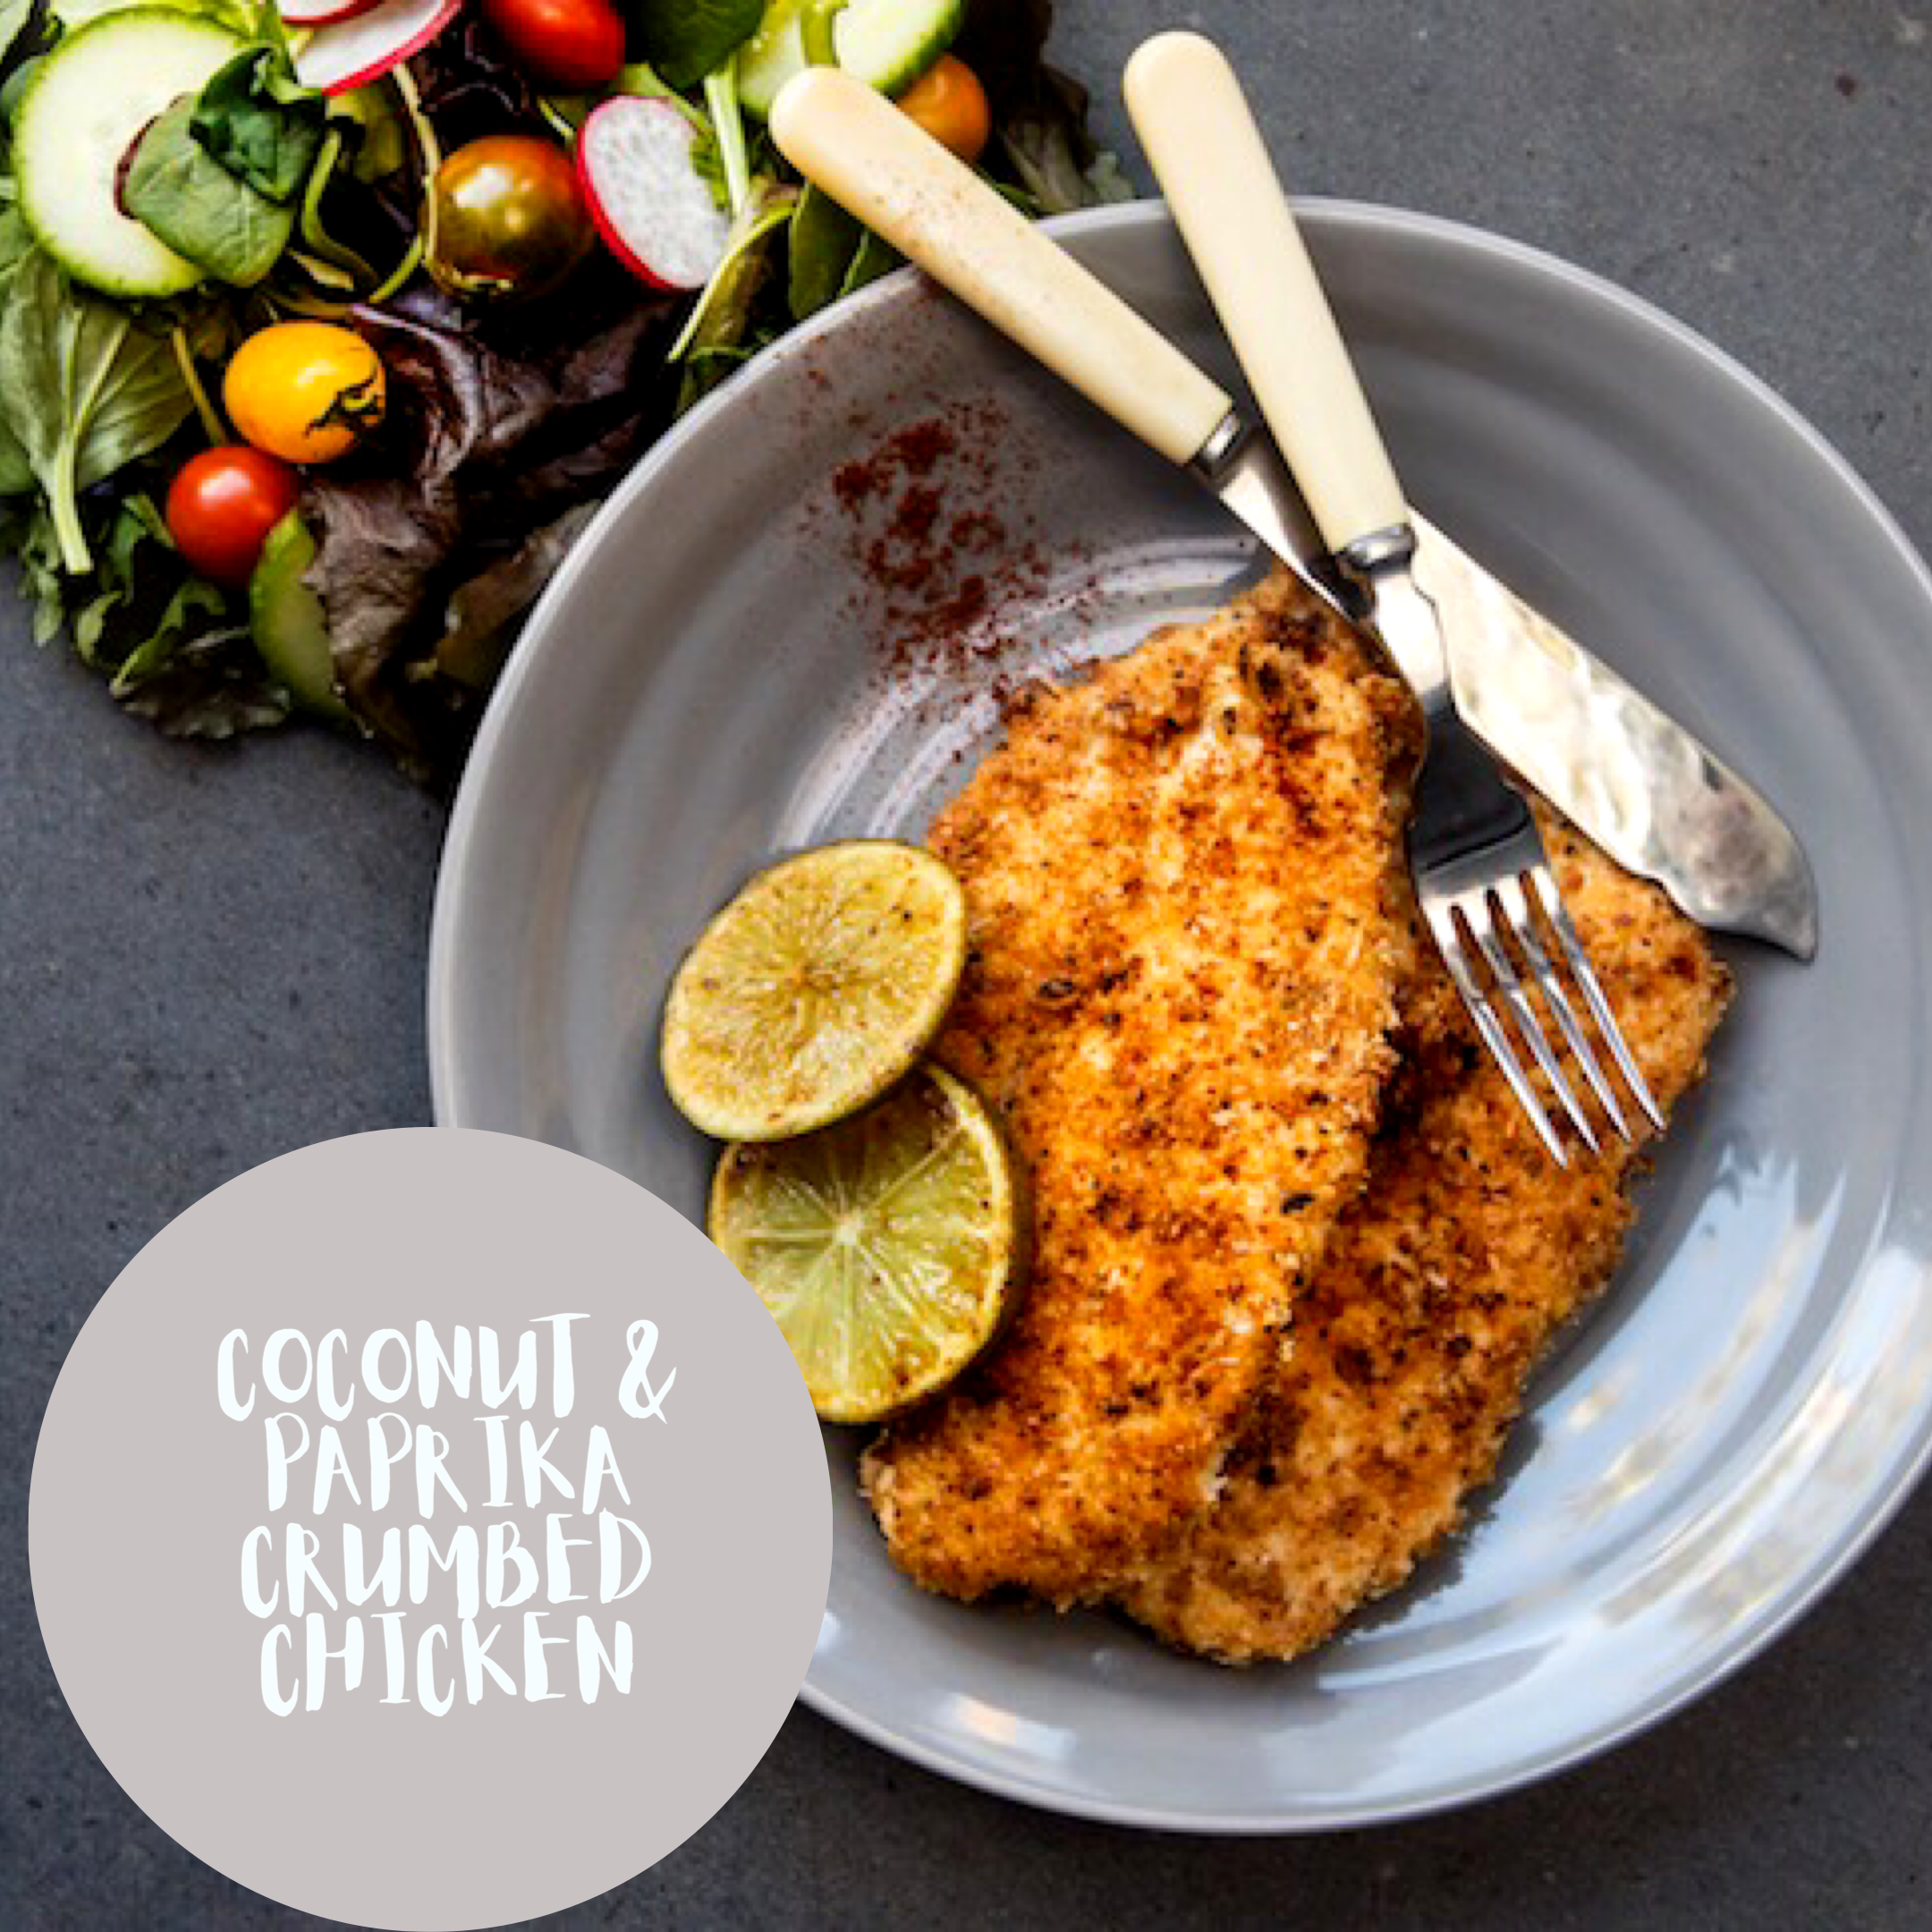 Coconut and Paprika Crumbed Chicken – 1 base recipe, 2 variations